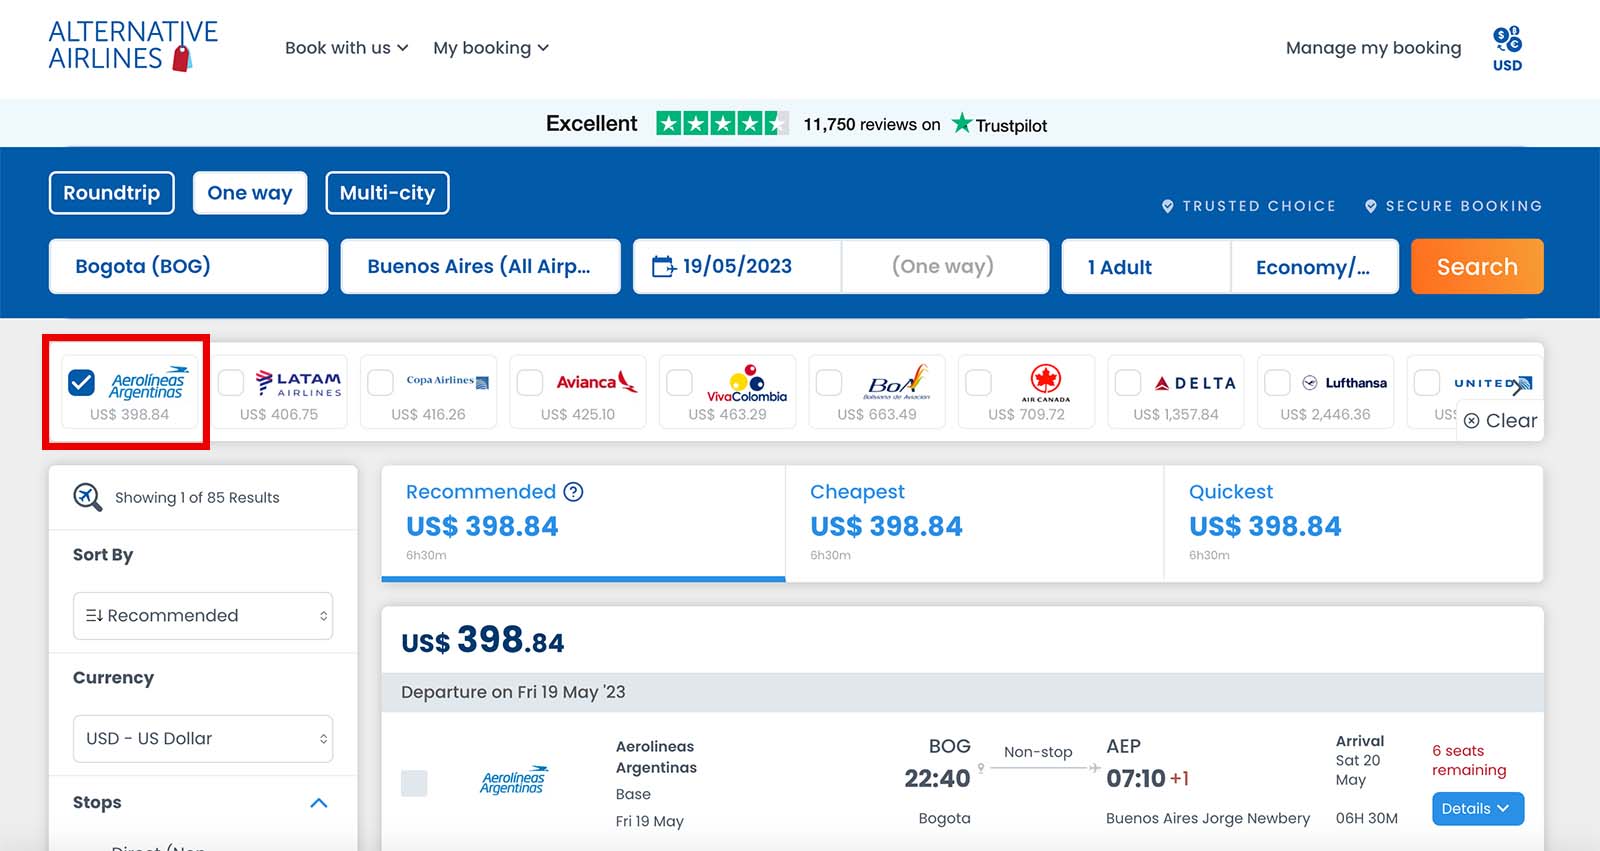 Step 2 - select to show only Aerolineas Argentinas flights